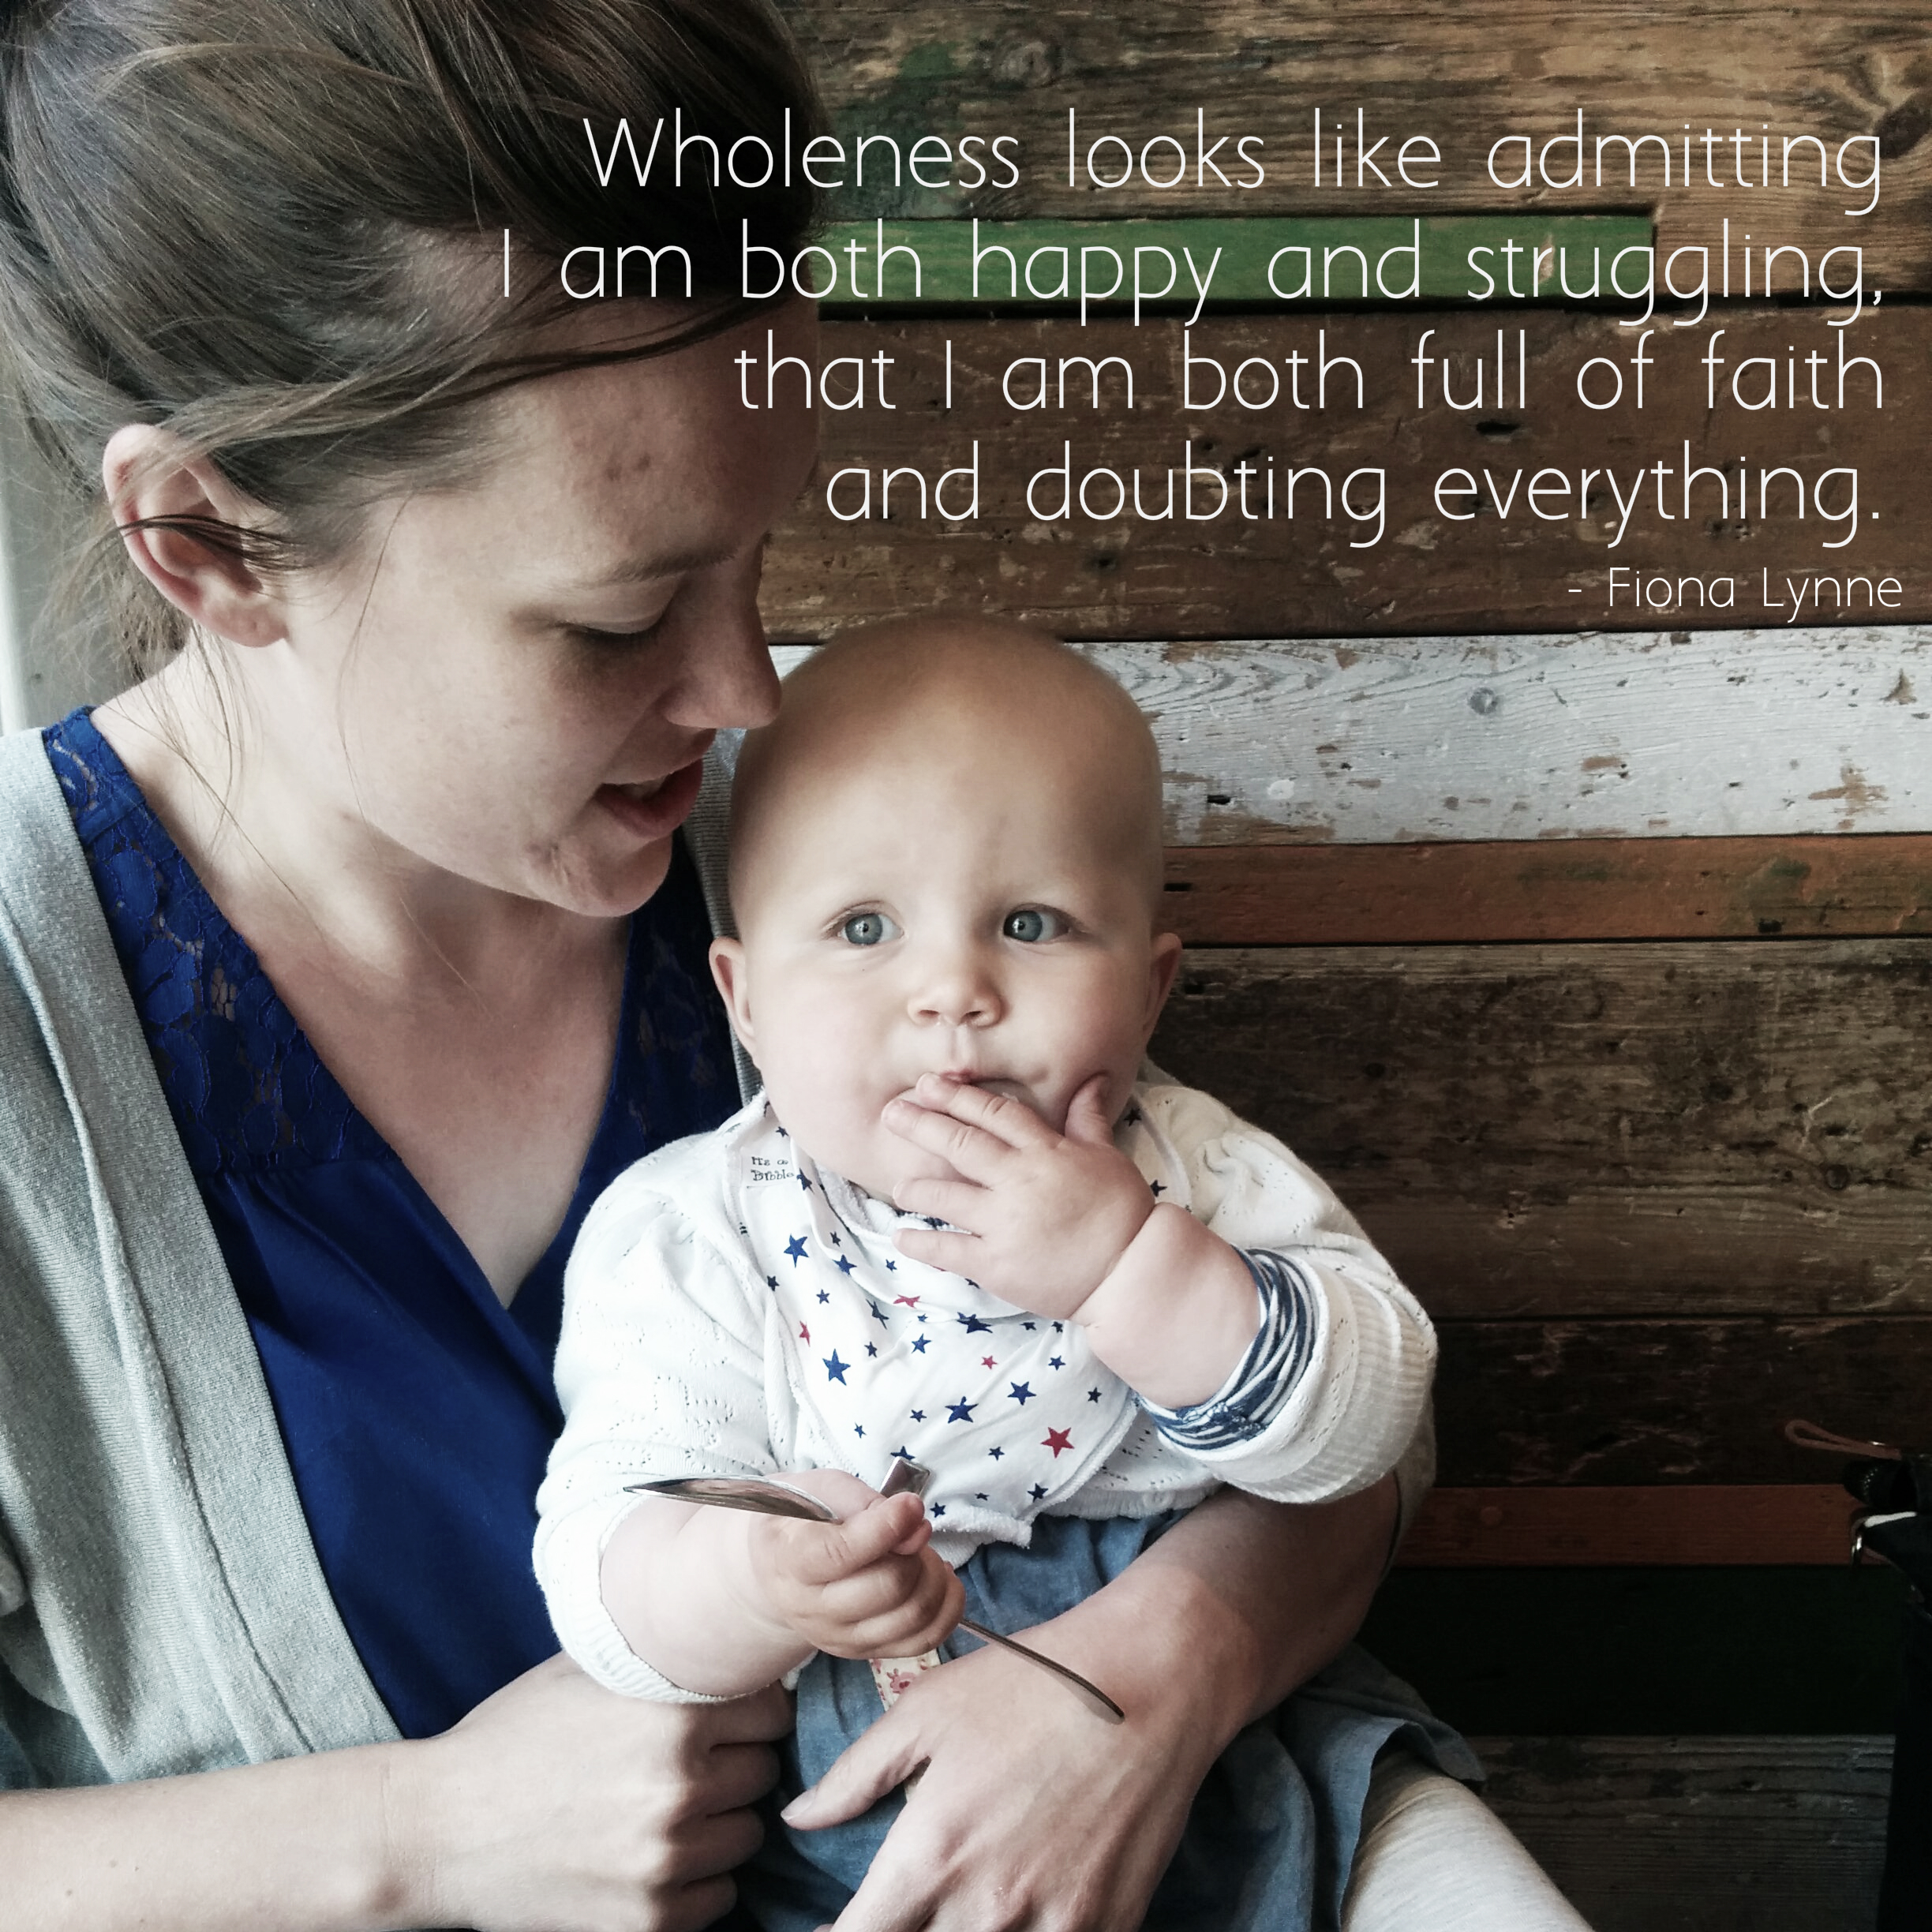 "Wholeness looks like admitting I am both happy and struggling, that I am both full of faith and doubting everything." - Fiona Lynne #wholemama